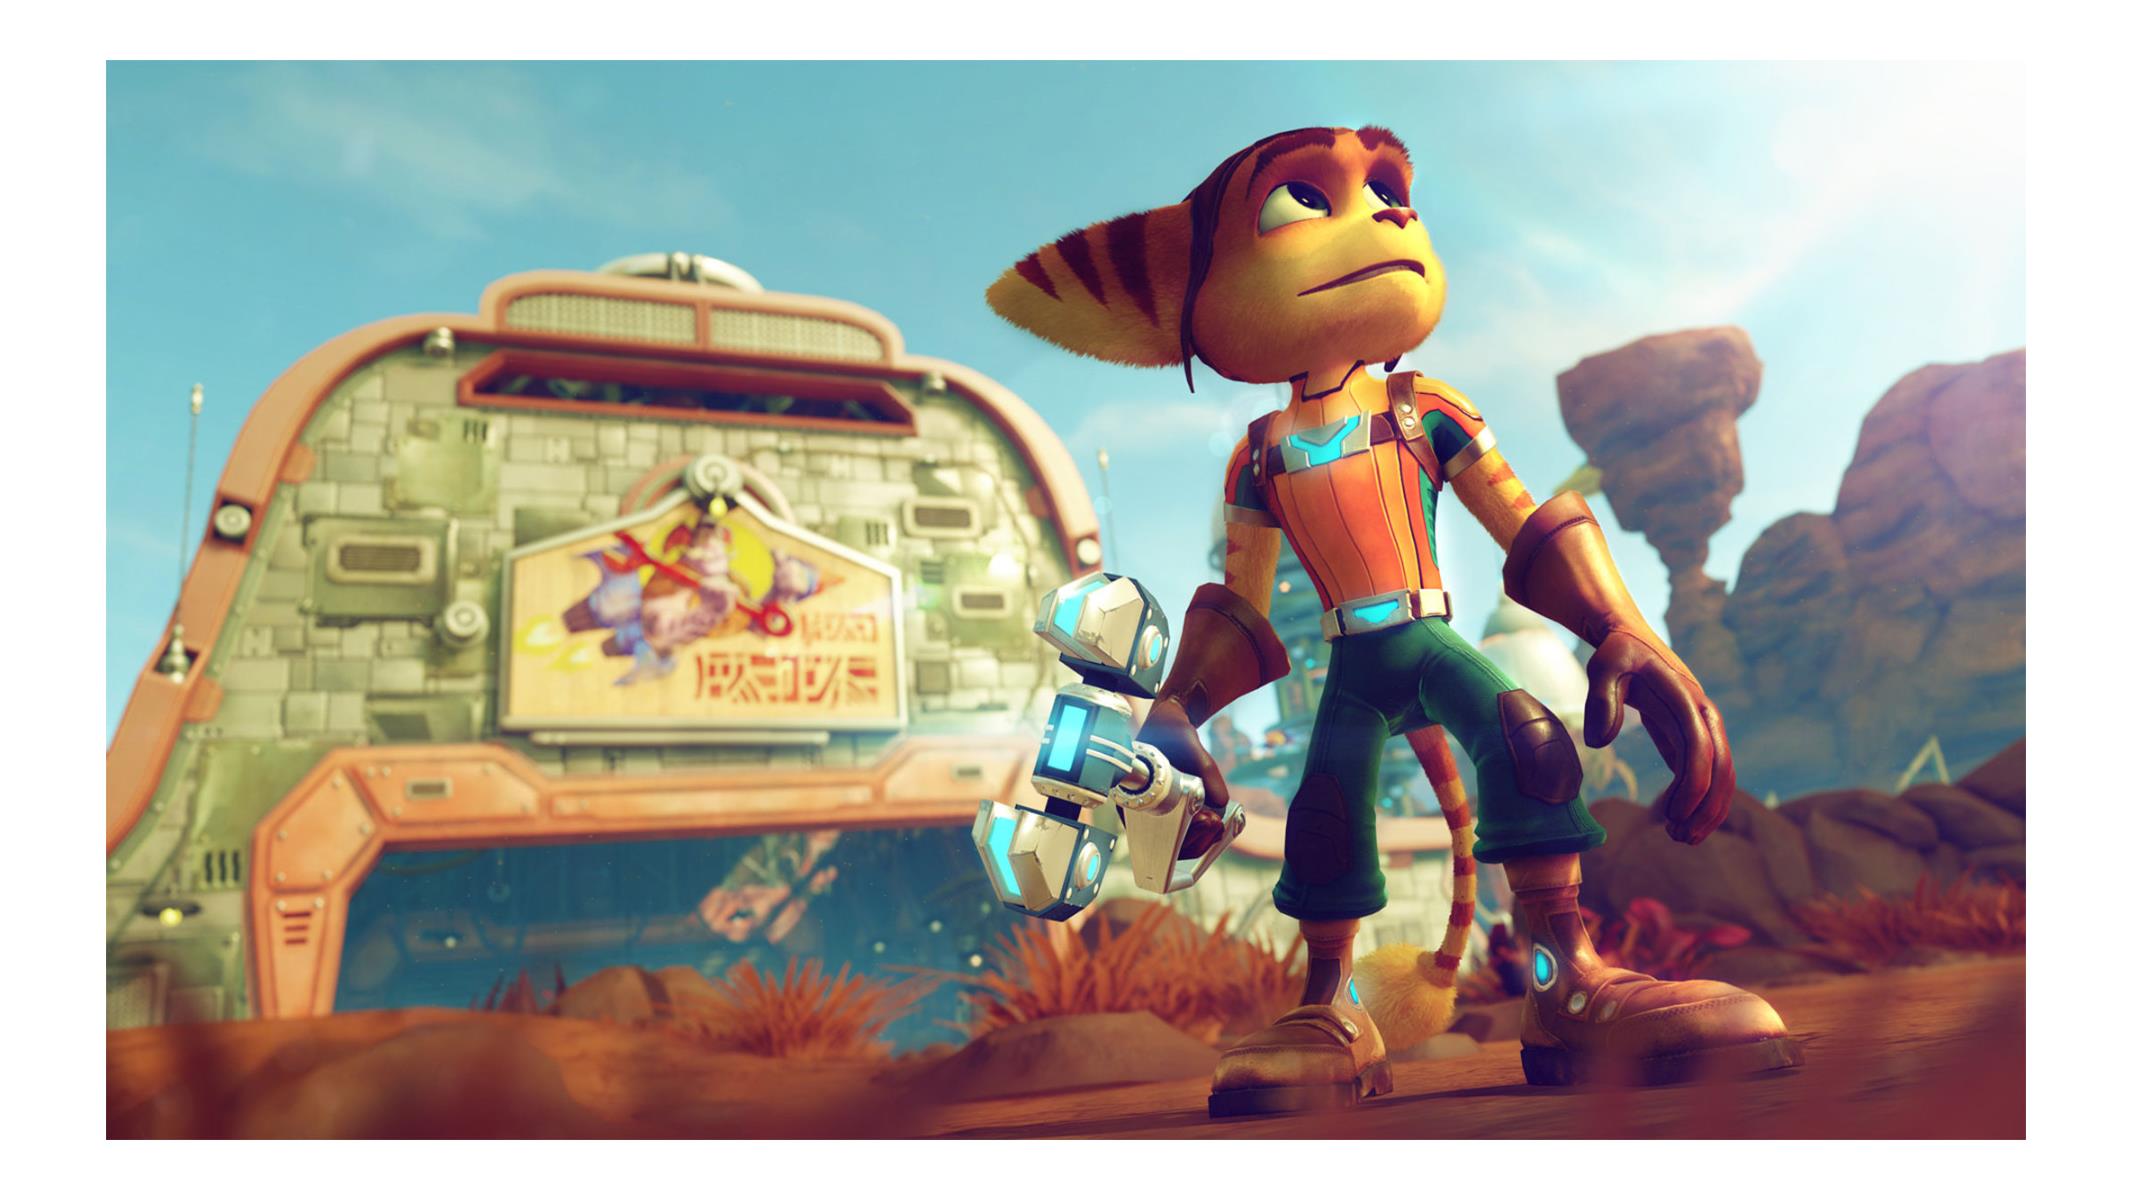 Ratchet & Clank PS4 free to keep in March with latest Sony Play at